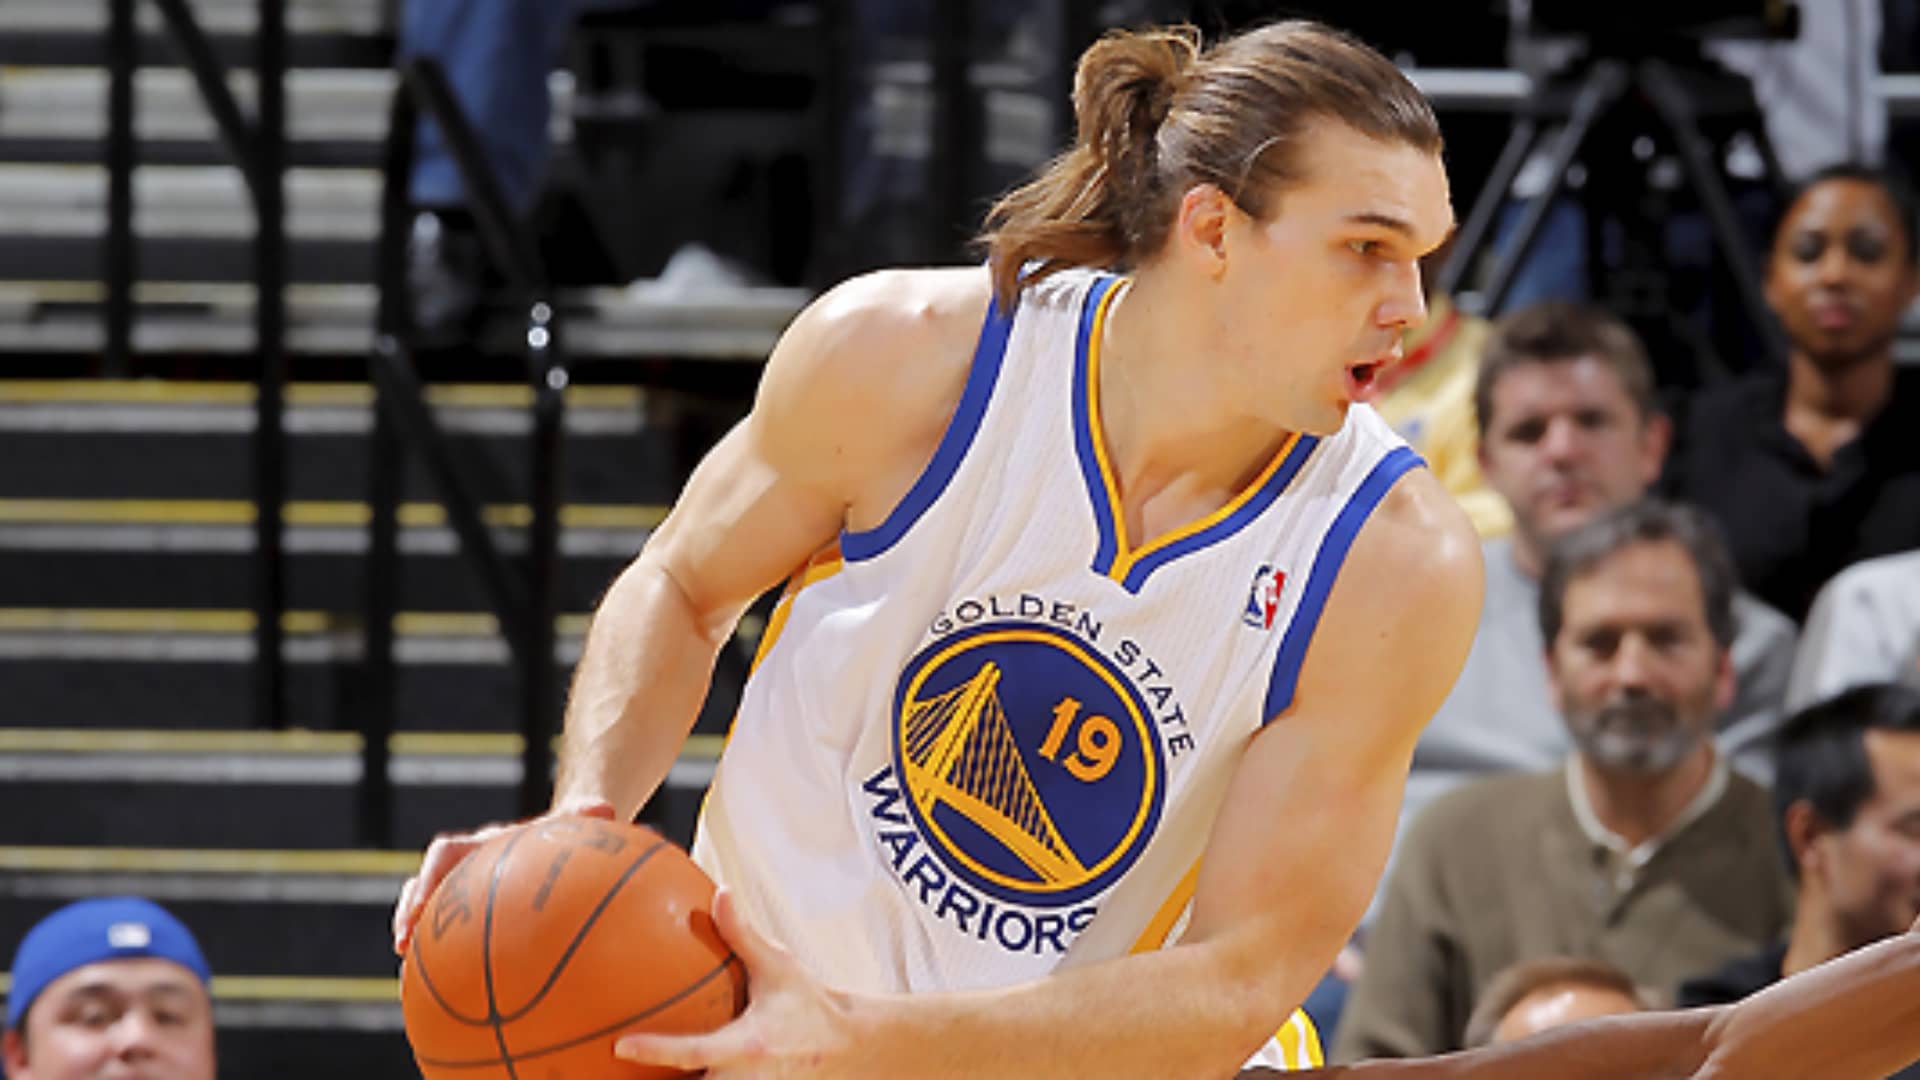 Lou Amundson- Who has played for the most NBA Teams?